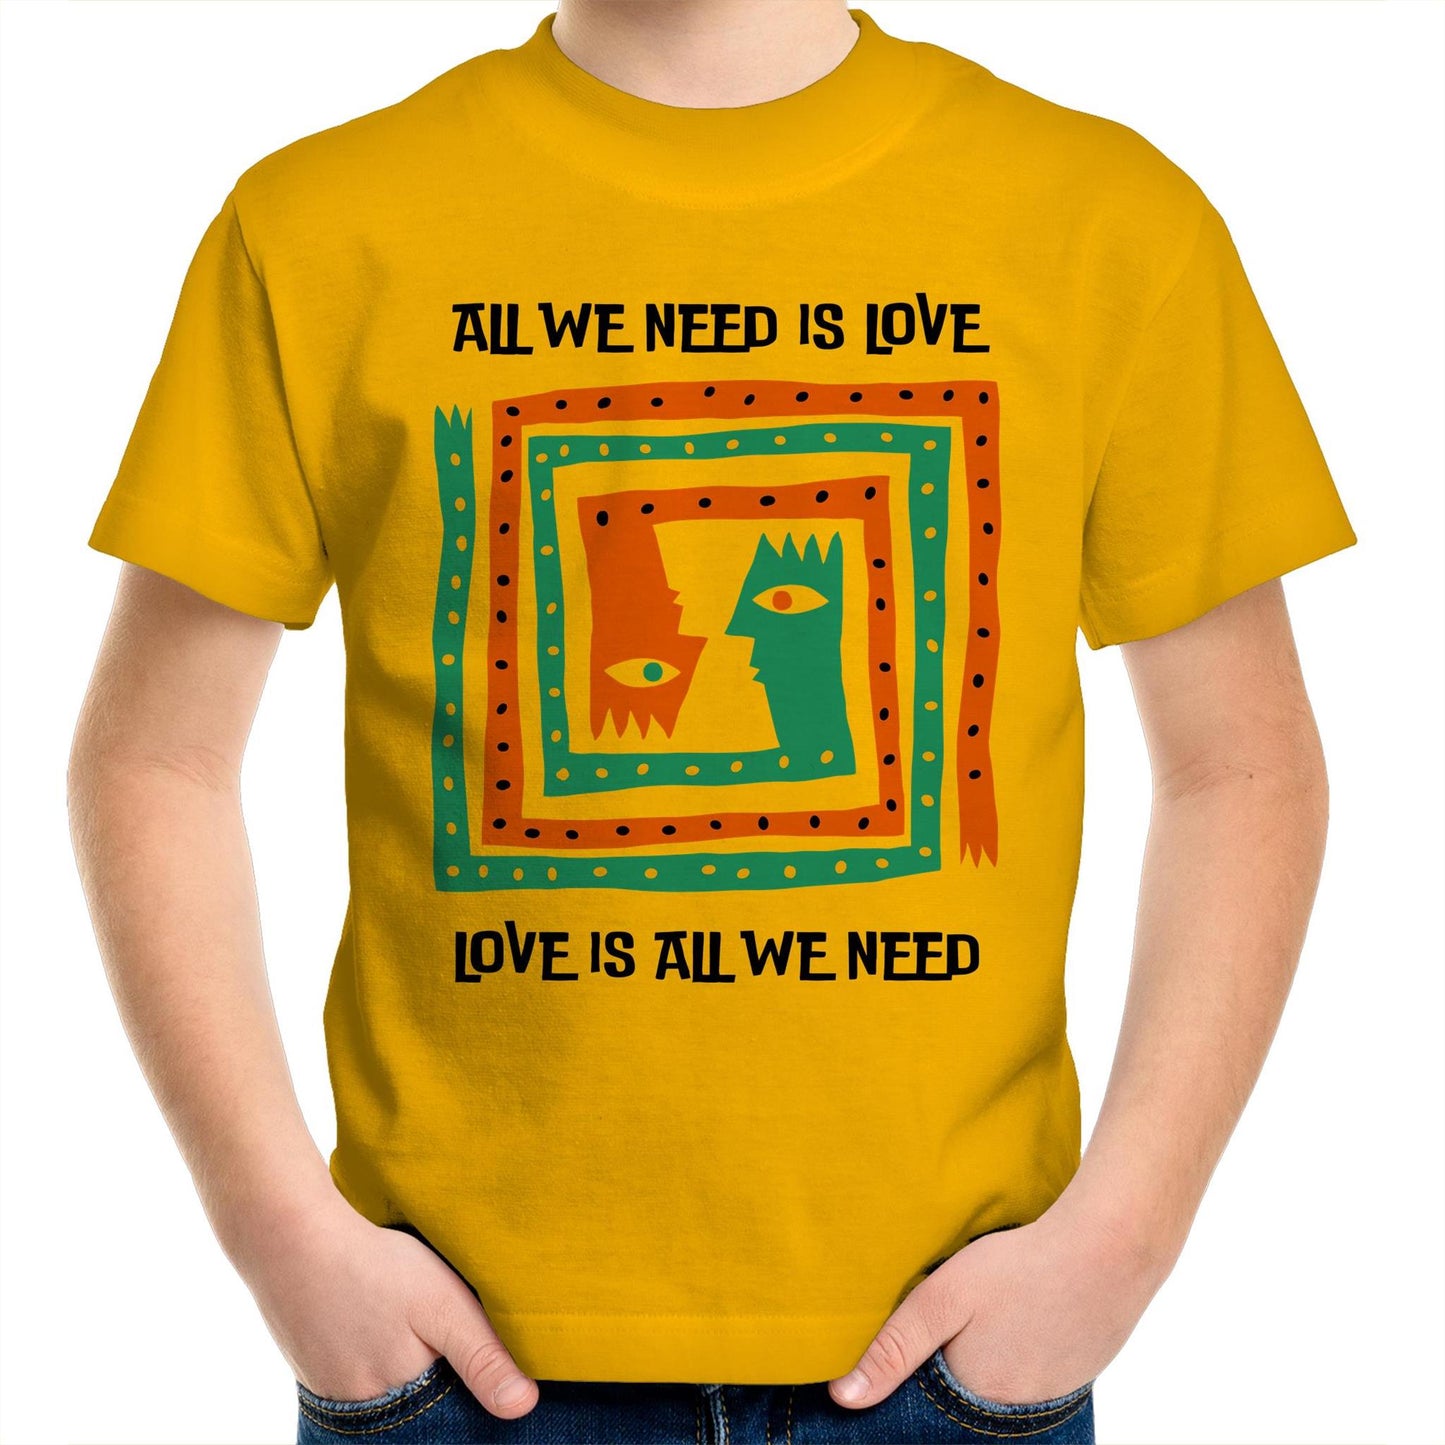 All We Need Is Love - Kids Youth T-Shirt Gold Kids Youth T-shirt